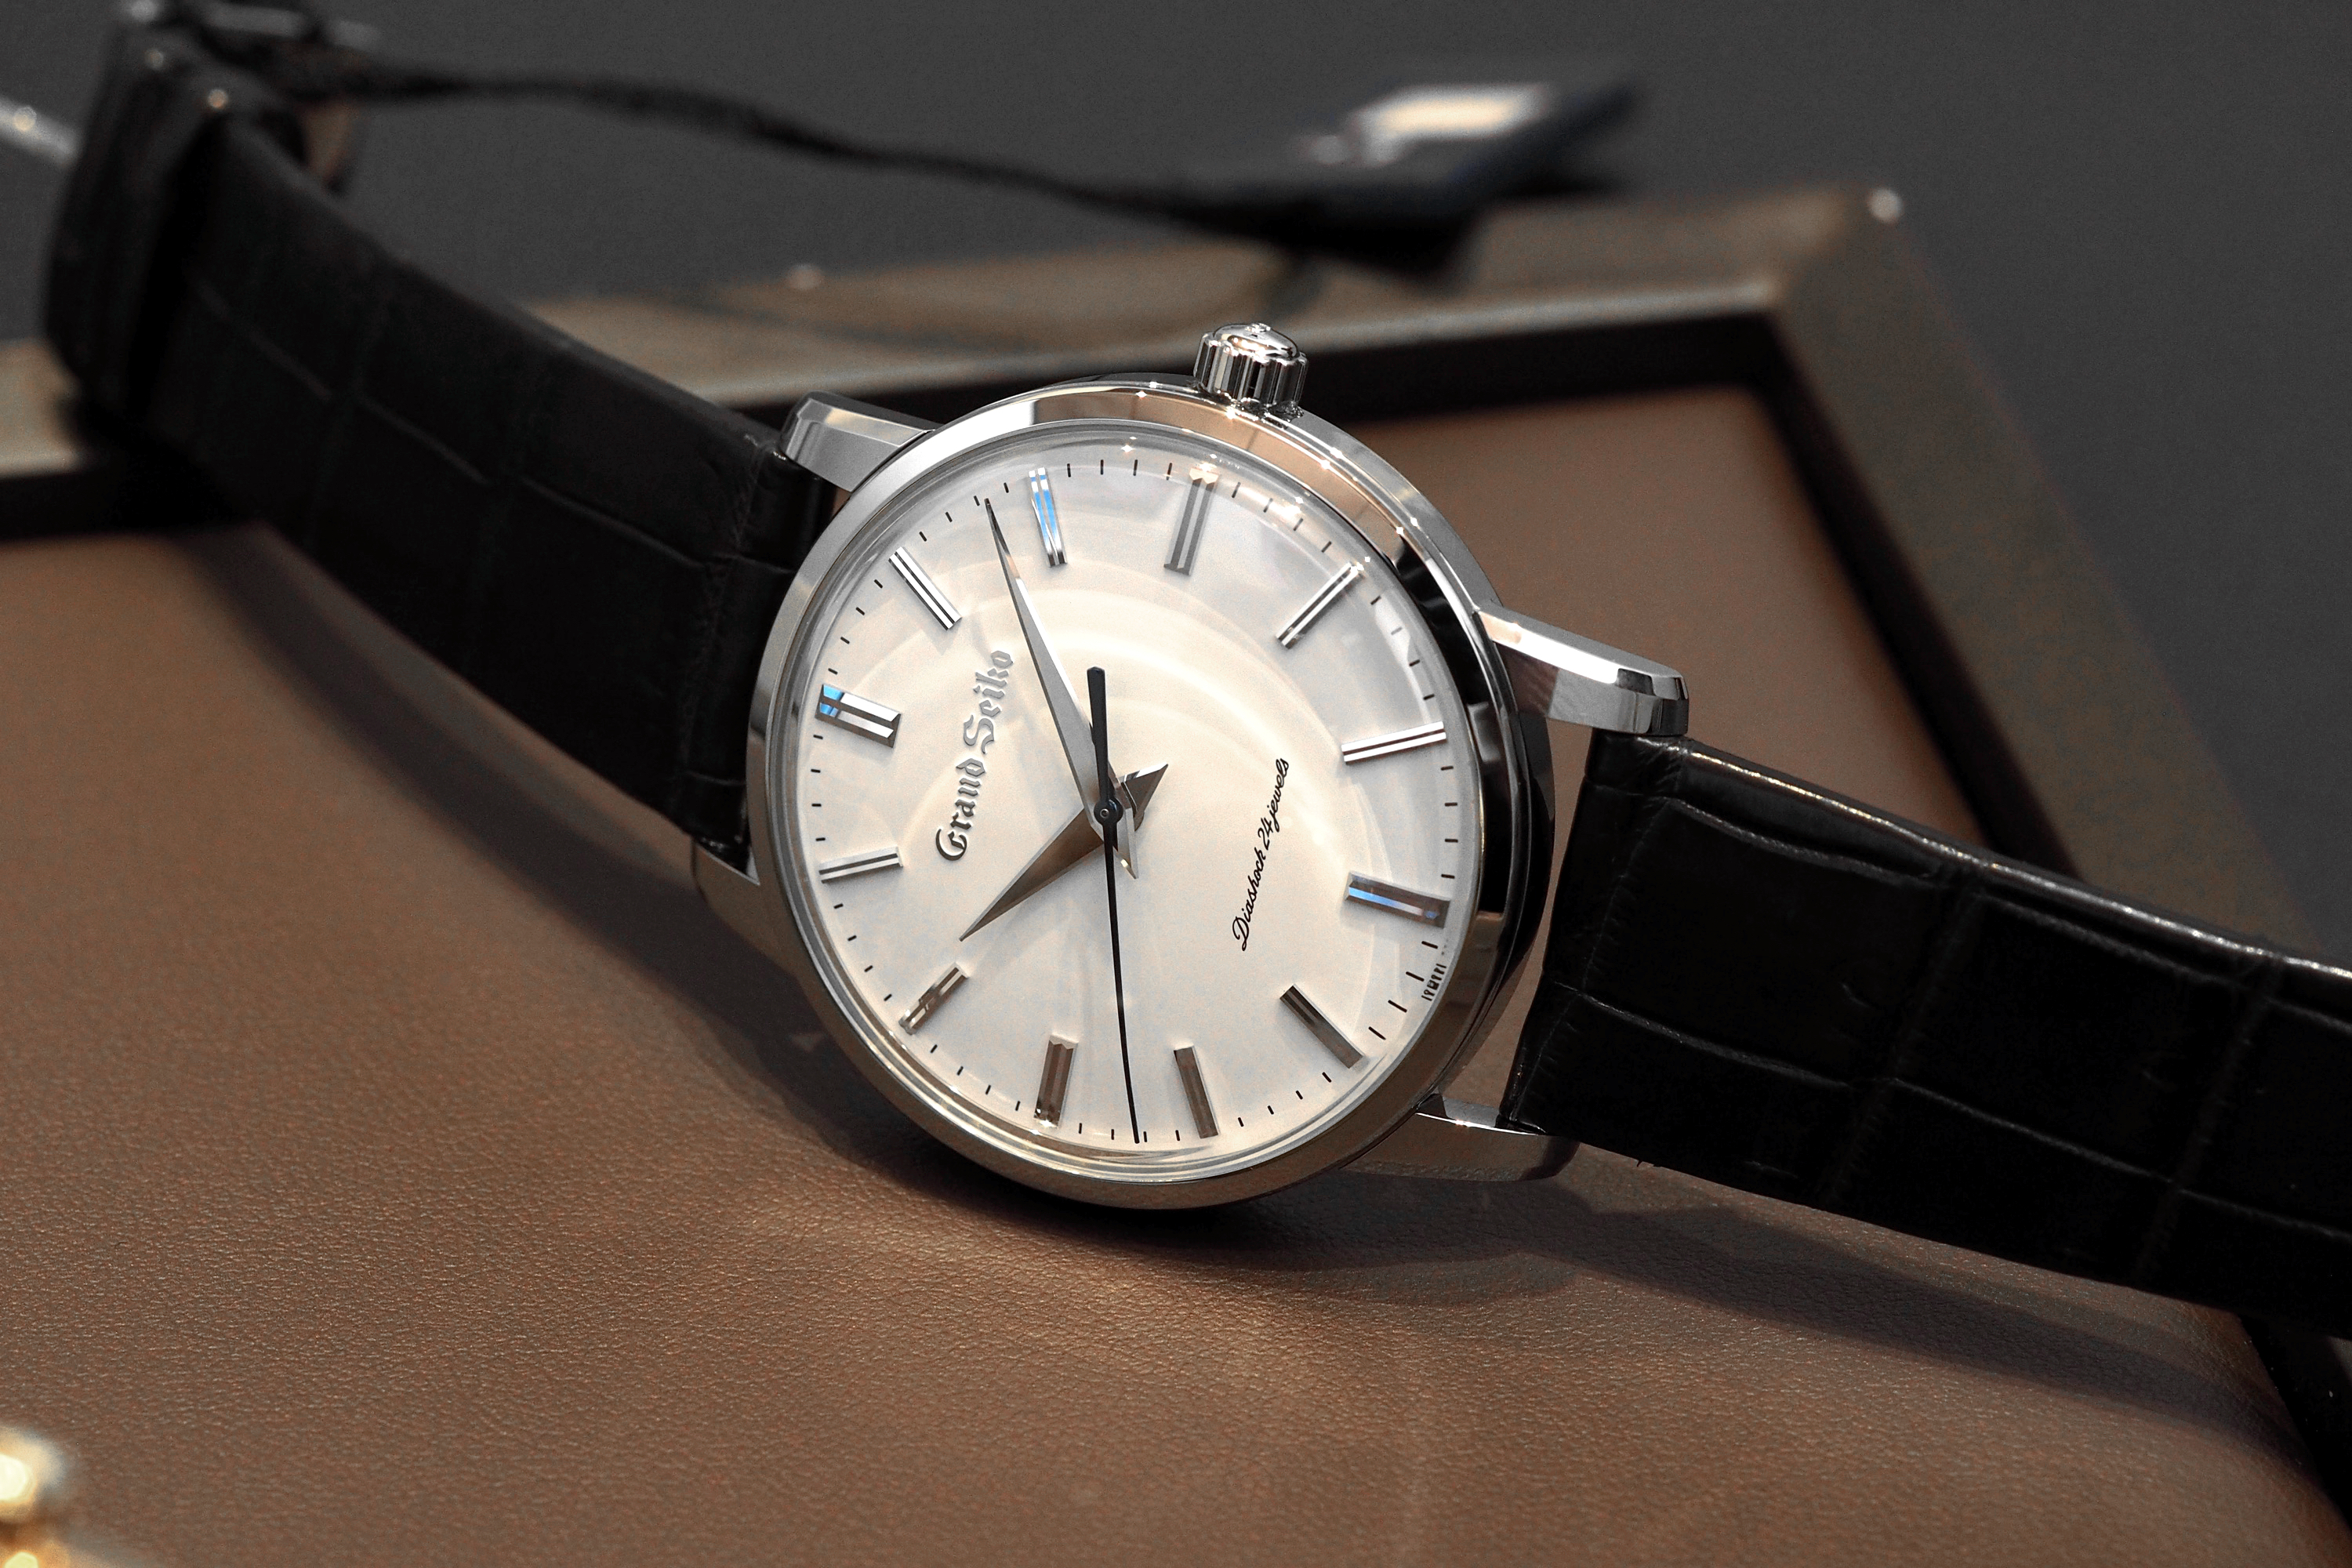 The first Grand Seiko, re-created in stainless steel